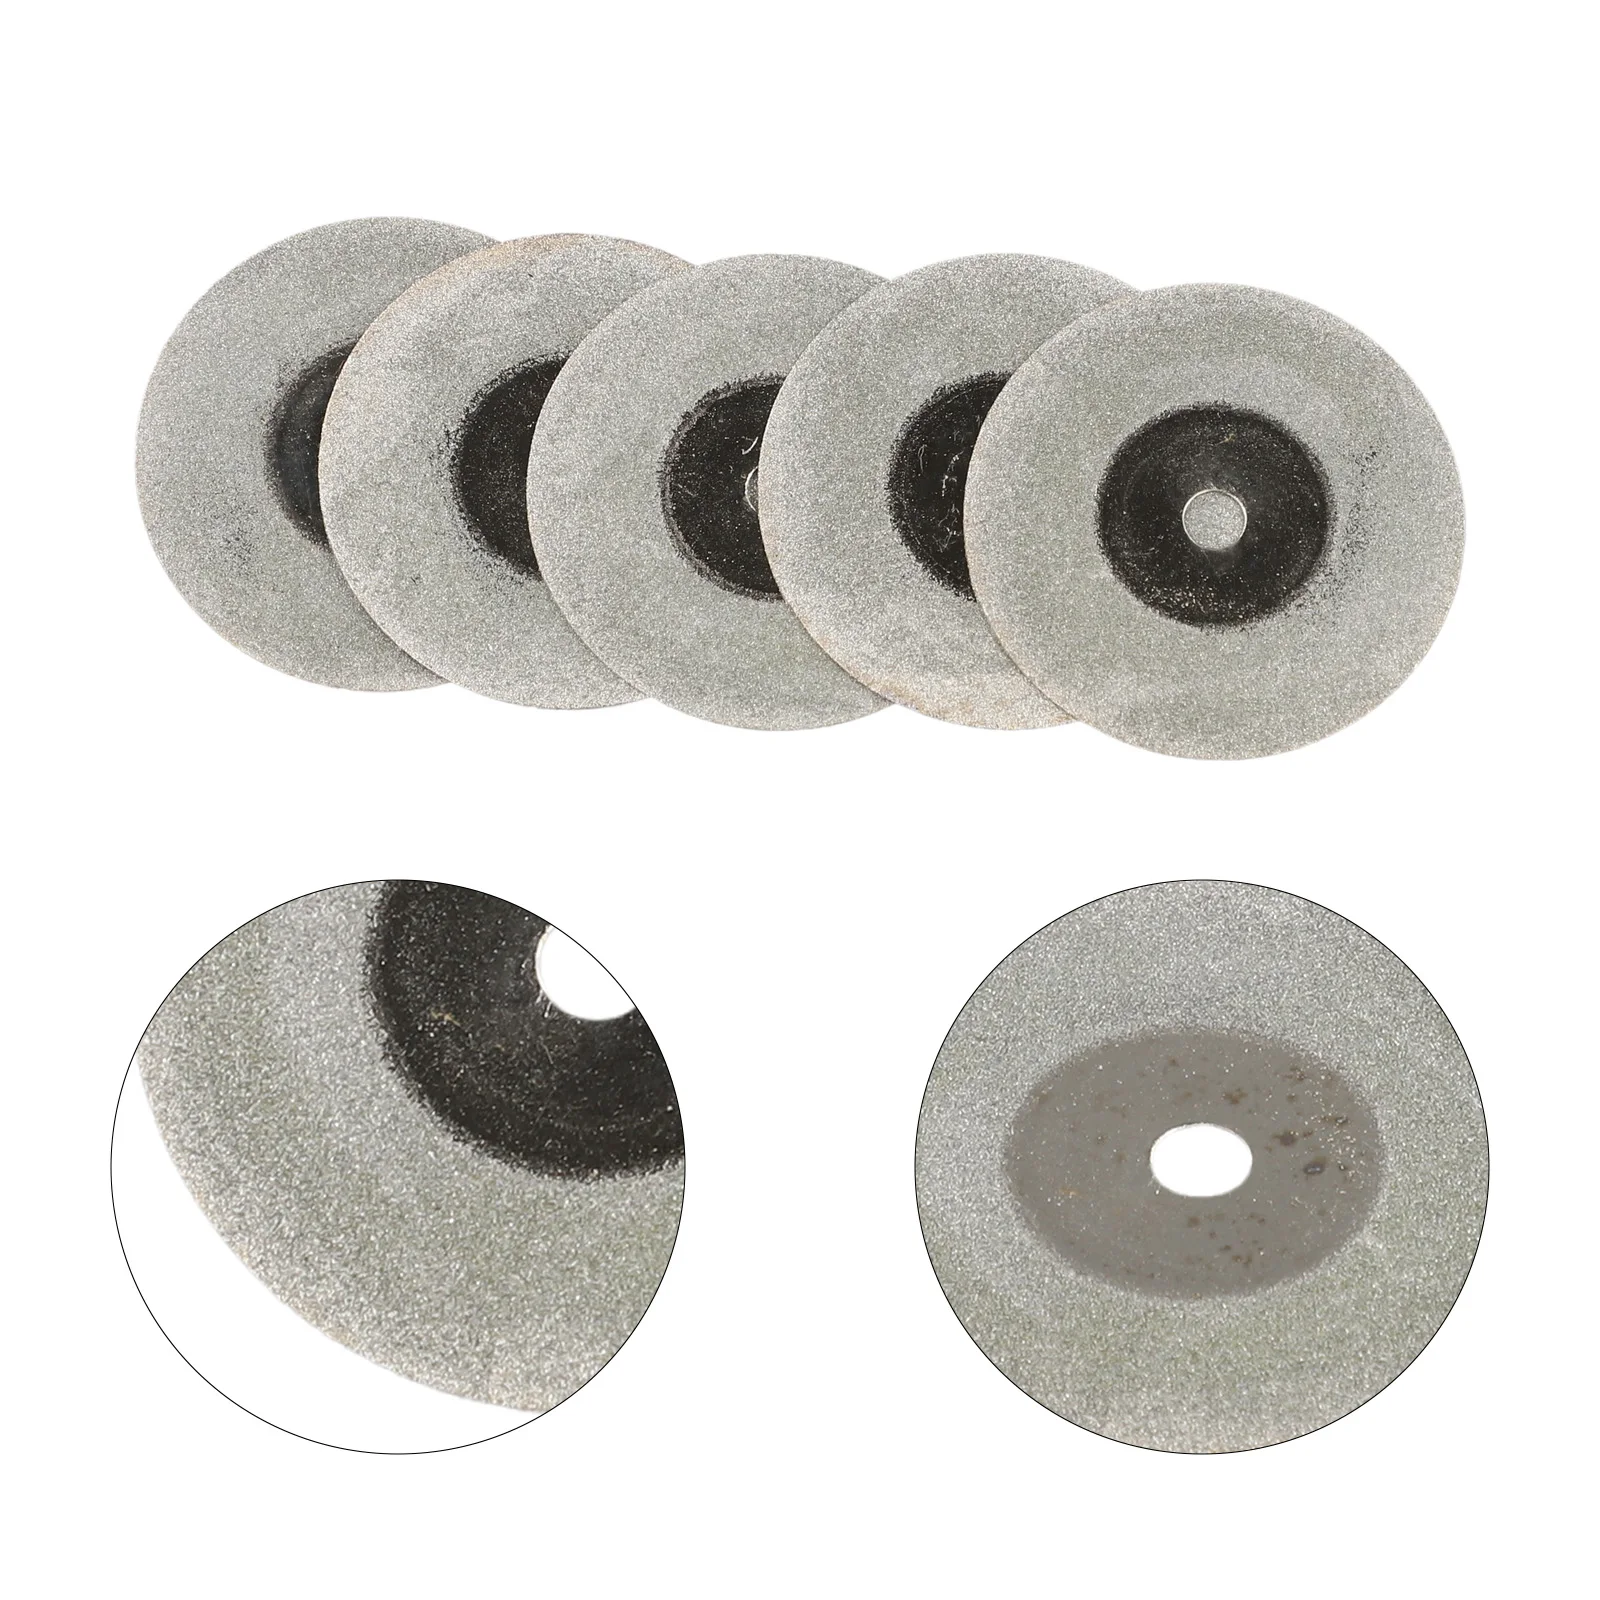 5pcs Cutting Discs 60mm Diamond Saw Blade Cutting Disc Glass Tiles Cutting Blades​ ​power Tools Replacement Accessories